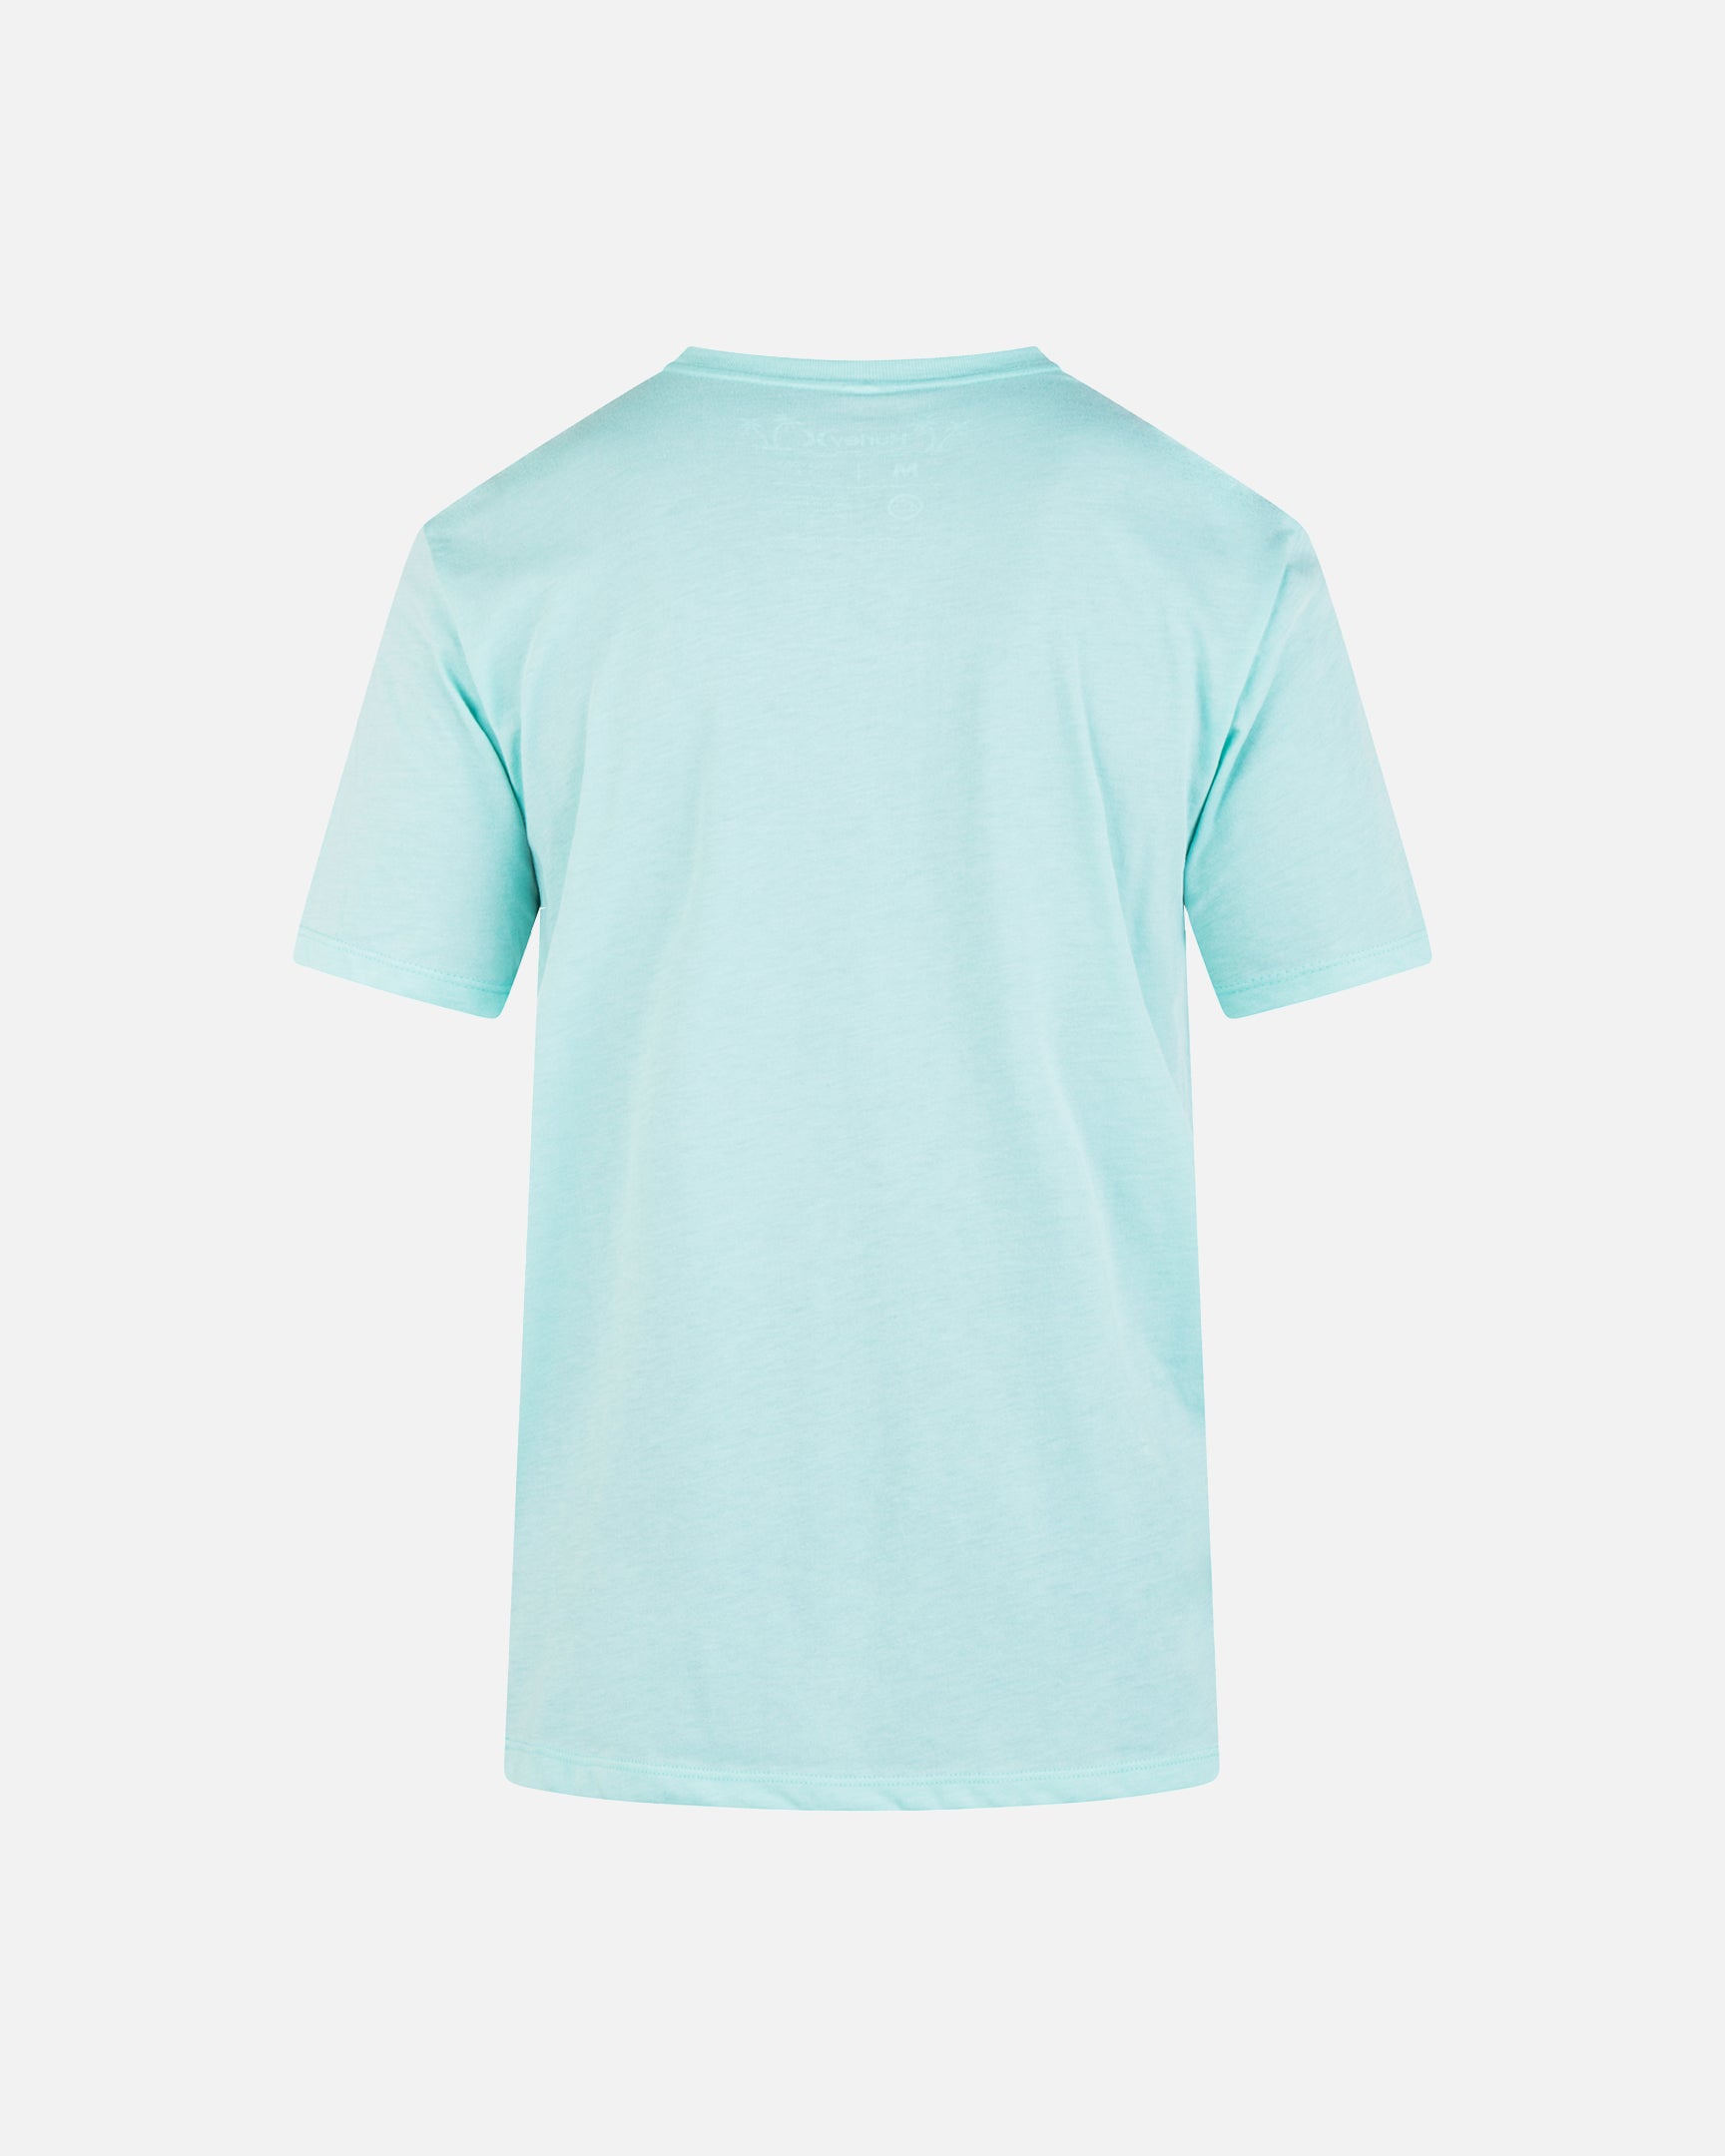 Light Aqua And Only Essential Sleeve - One Short Hurley | Polo